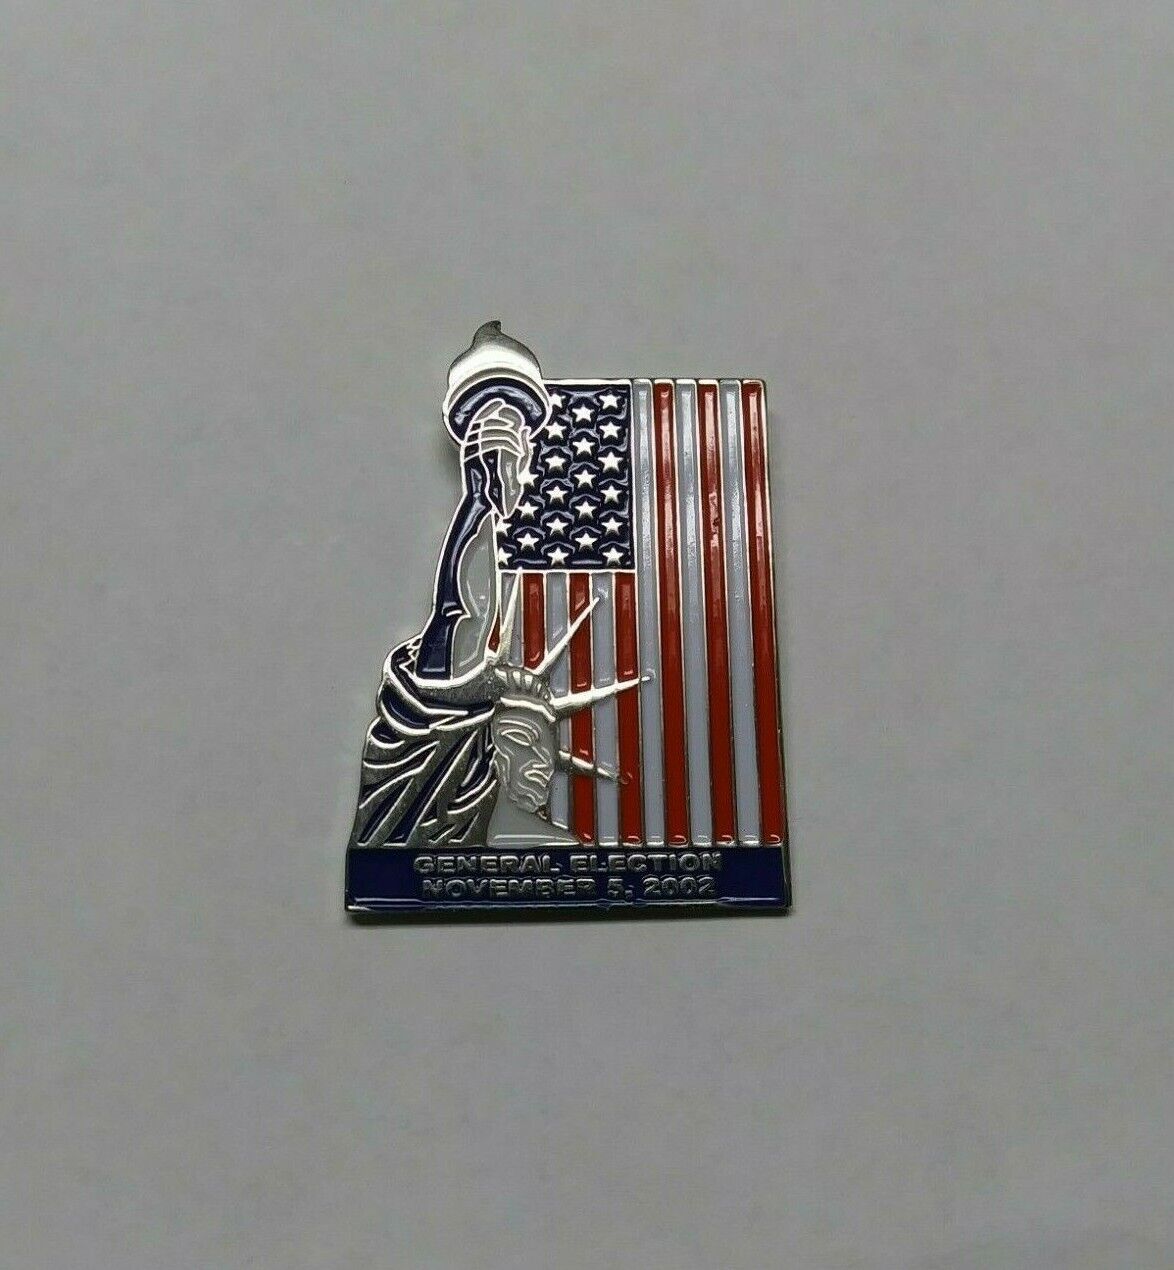 UNITED STATES 2002 ELECTION DAY STATUE OF LIBERTY & U.S. FLAG METAL LAPEL PIN